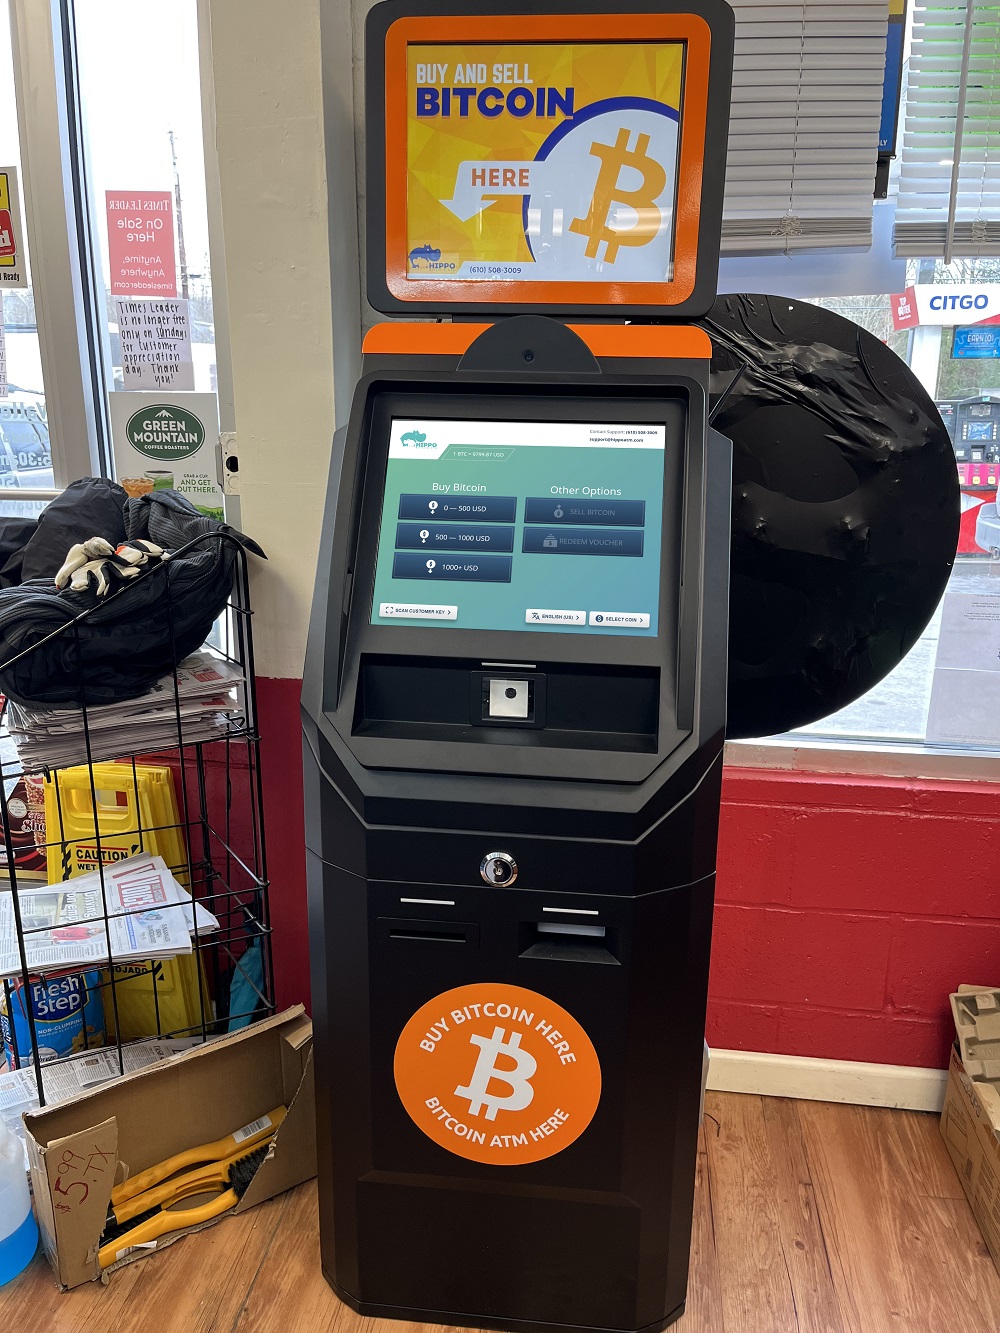 Bitcoin ATM at Dallas PA at ValleyMart Citgo gas station by Hippo ATM